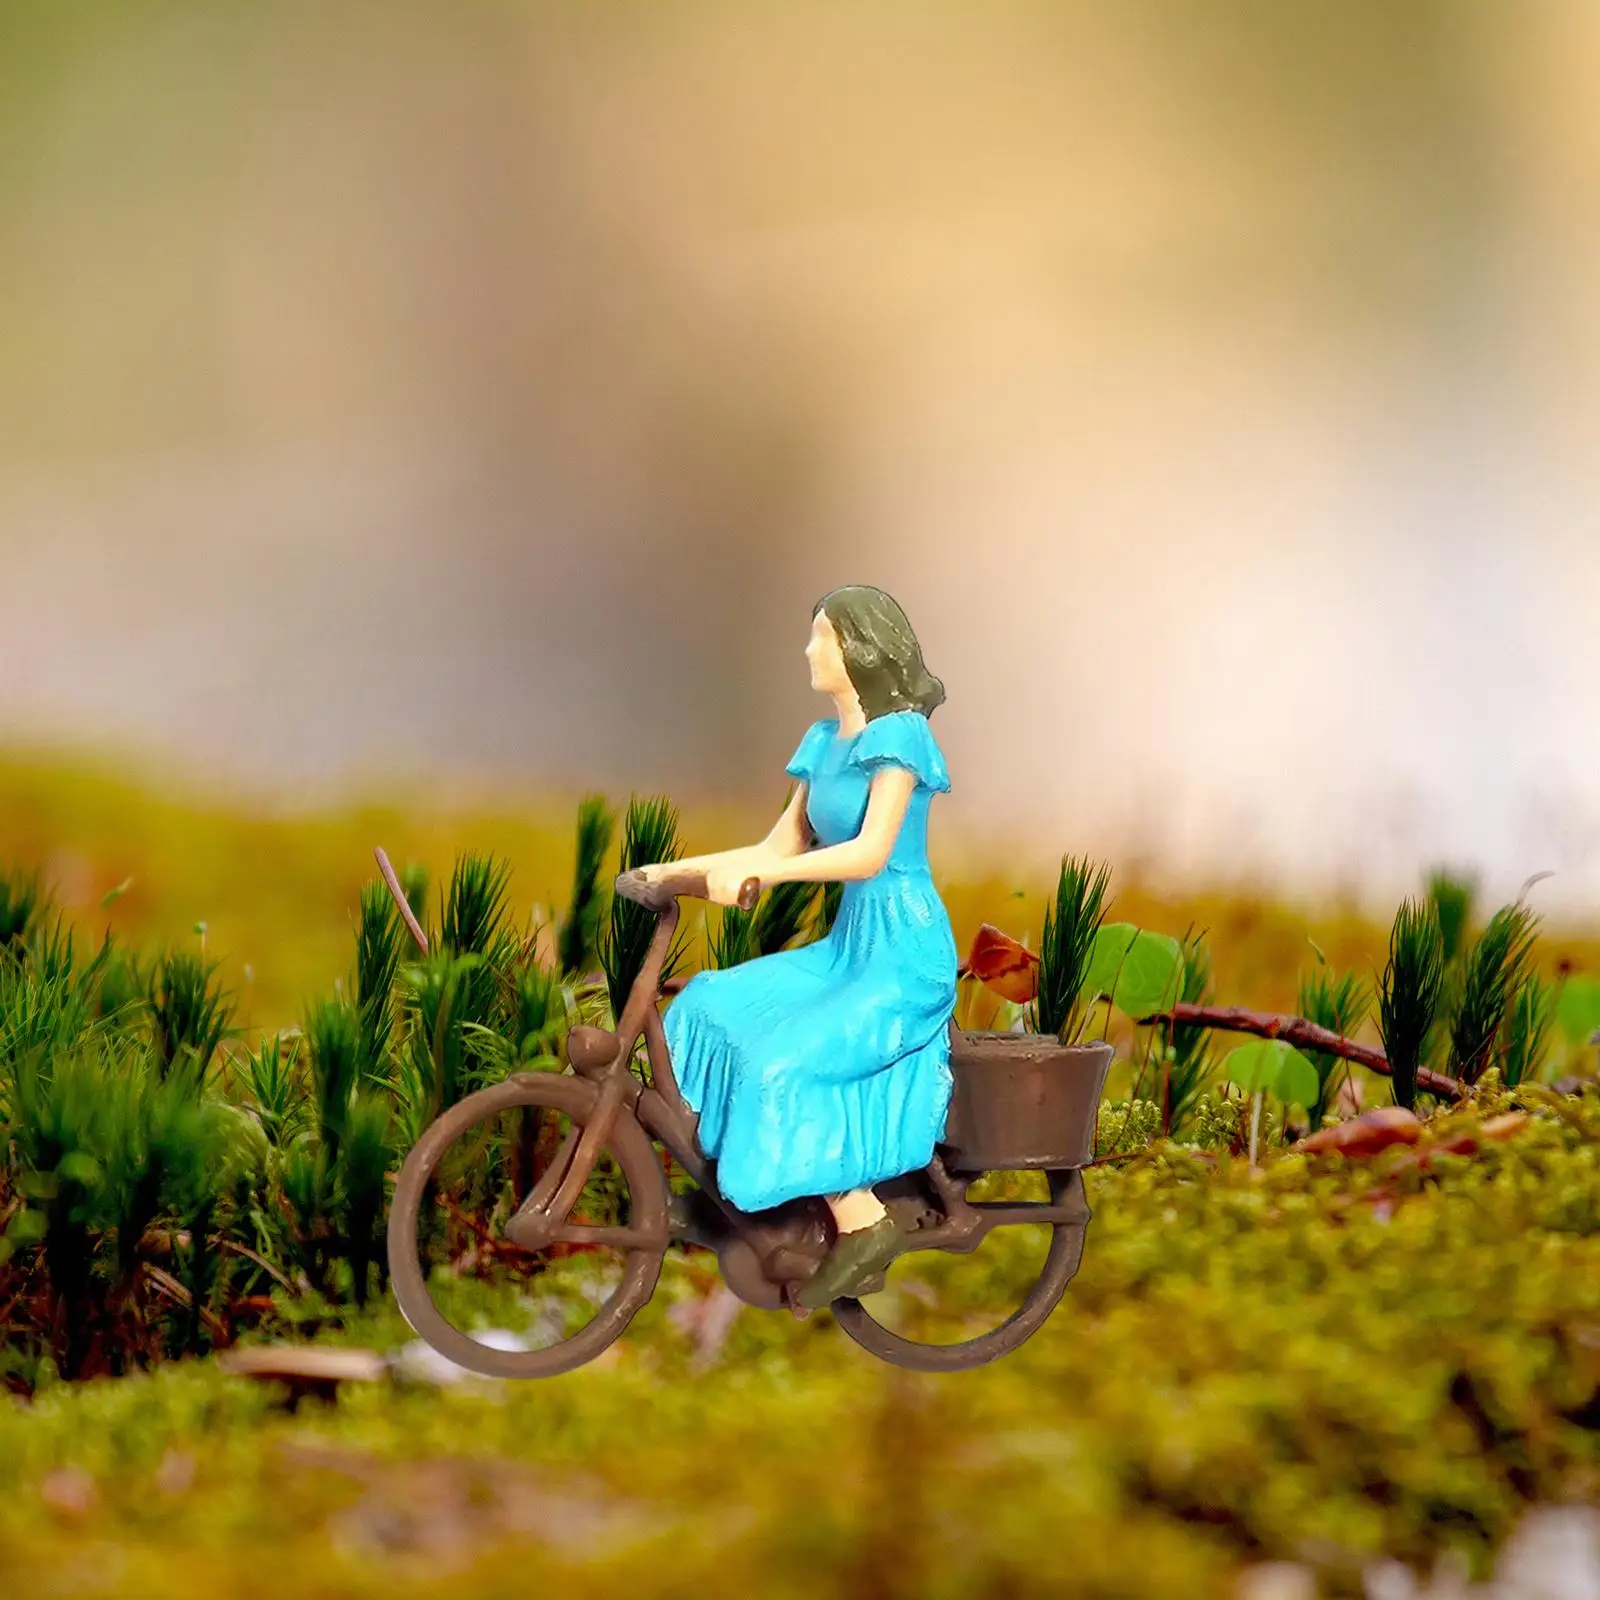 Resin 1/87 Scale Cyclist Figures Ornament Tiny People for Dollhouse Layout